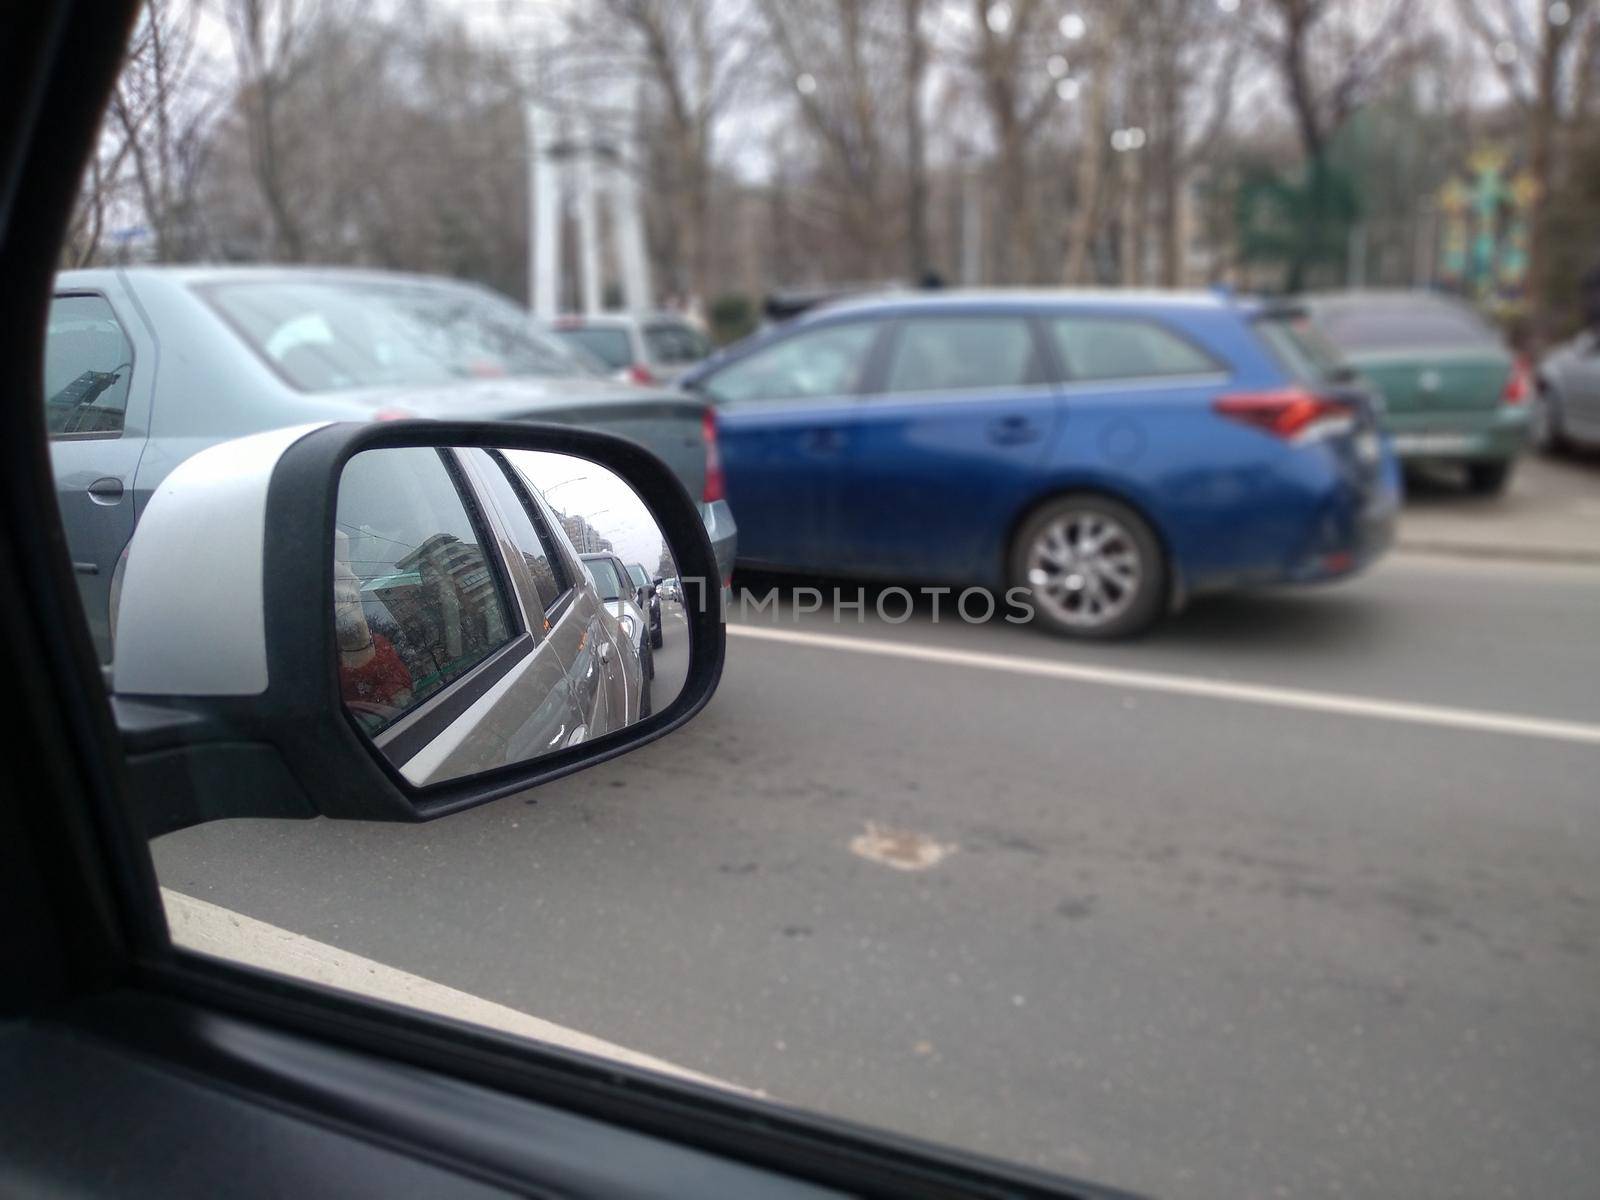 Road view through car window and mirror, cars on road in traffic in Bucharest, Romania, 2021